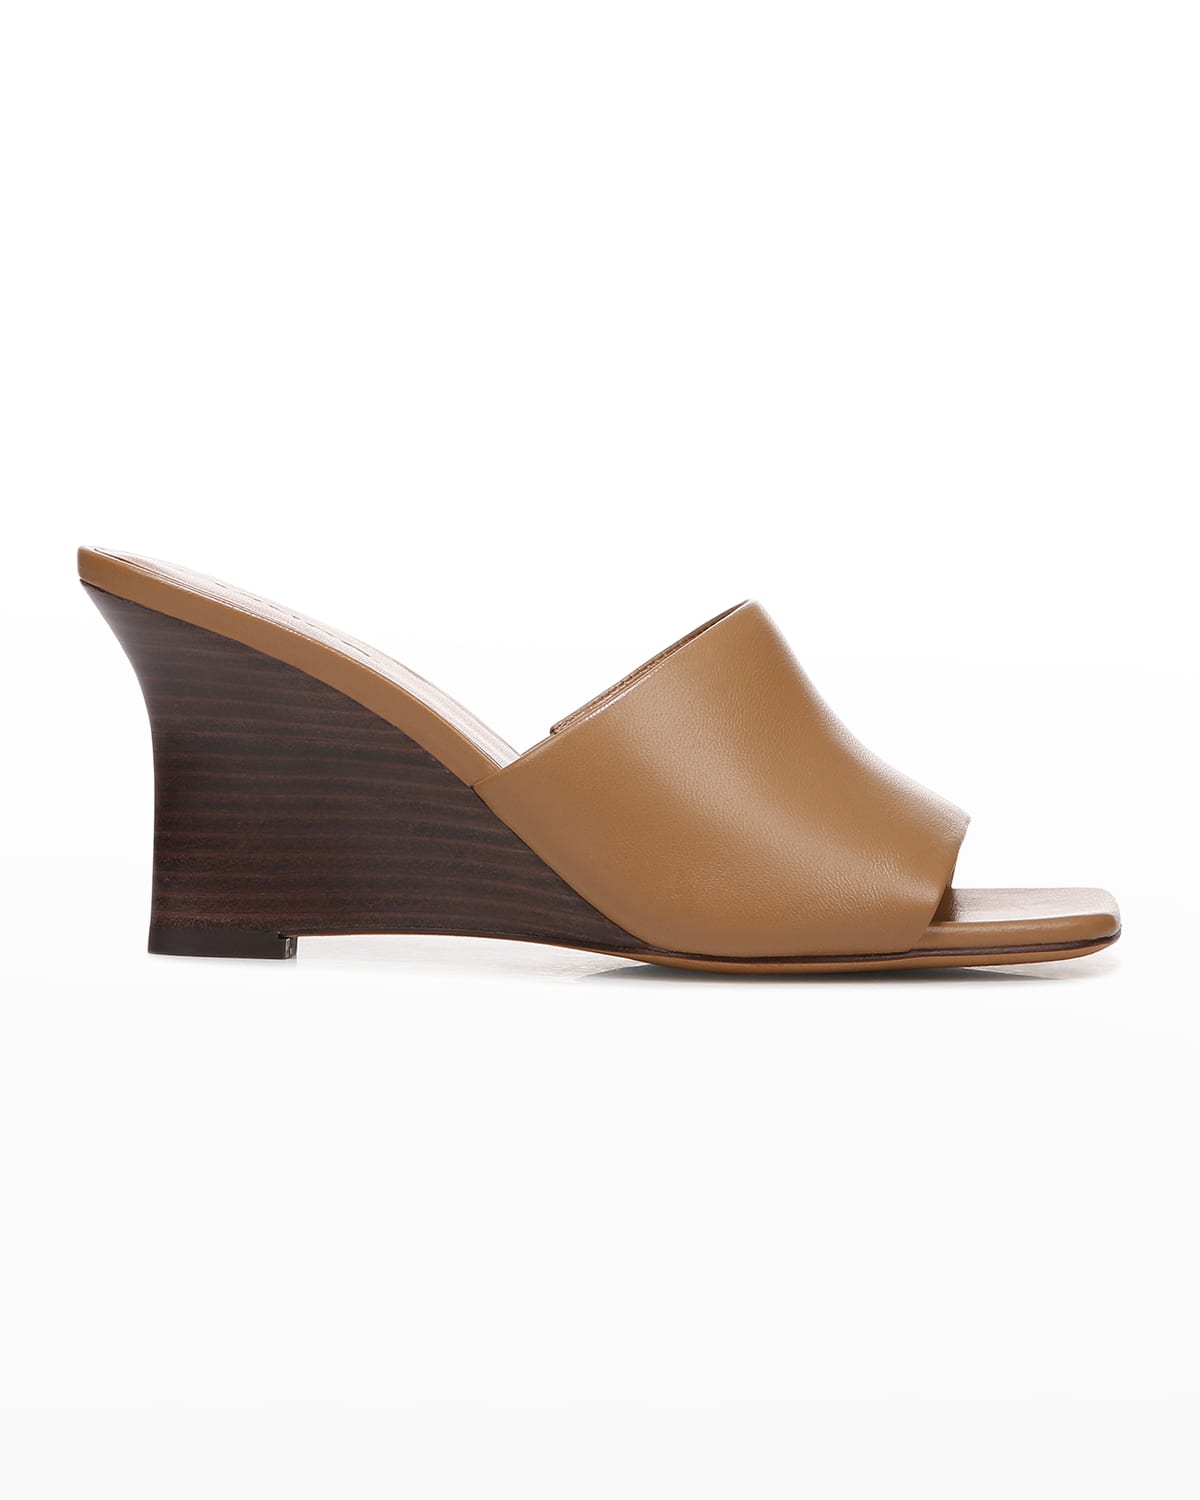 Shop Vince Pia Leather Wedge Sandals In Tan